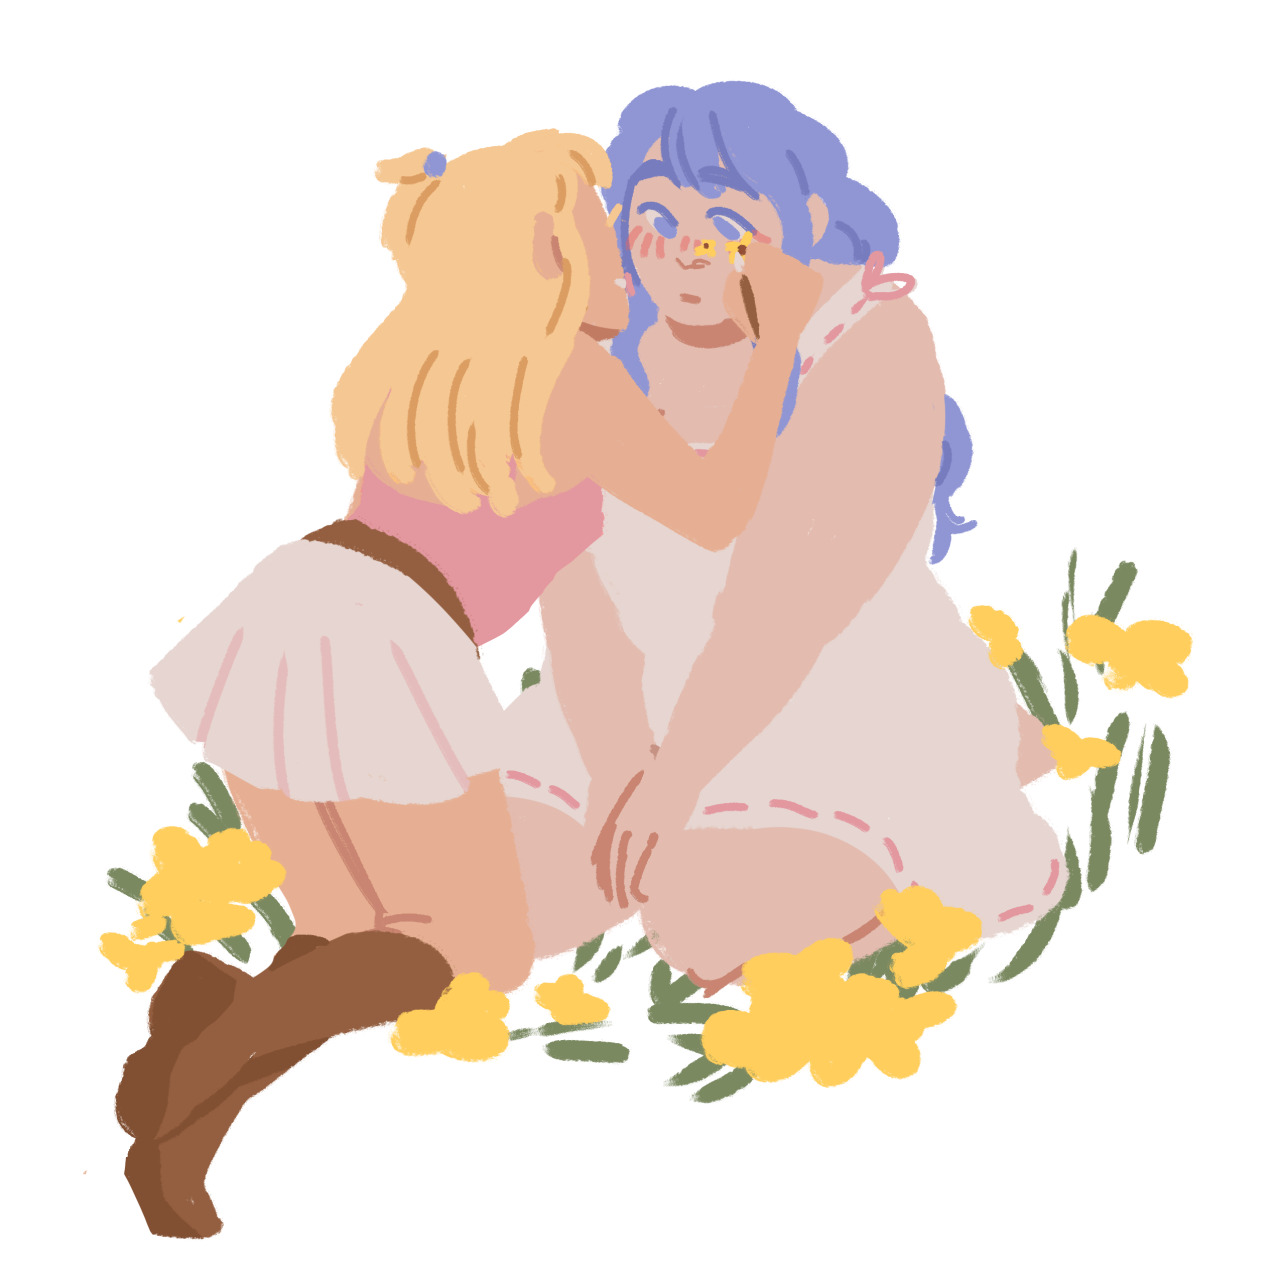 [ID: A partially lineless digital illustration of Lucy and Juvia from Fairy Tail. Juvia is wearing a white sundress and Lucy is wearing a pink tank top and a white skirt. They are knelt in a field of yellow flowers and Lucy leans forward to paint similar yellow flowers on Juvia’s cheek. End ID.]Top 10 Images that would have given me a clue in middle school,,, #luvia#lucyxjuvia #lucy x juvia #rarepairs2022 #anyway. #fairy tail#juvia lockser#juvia loxar#lucy heartfilia